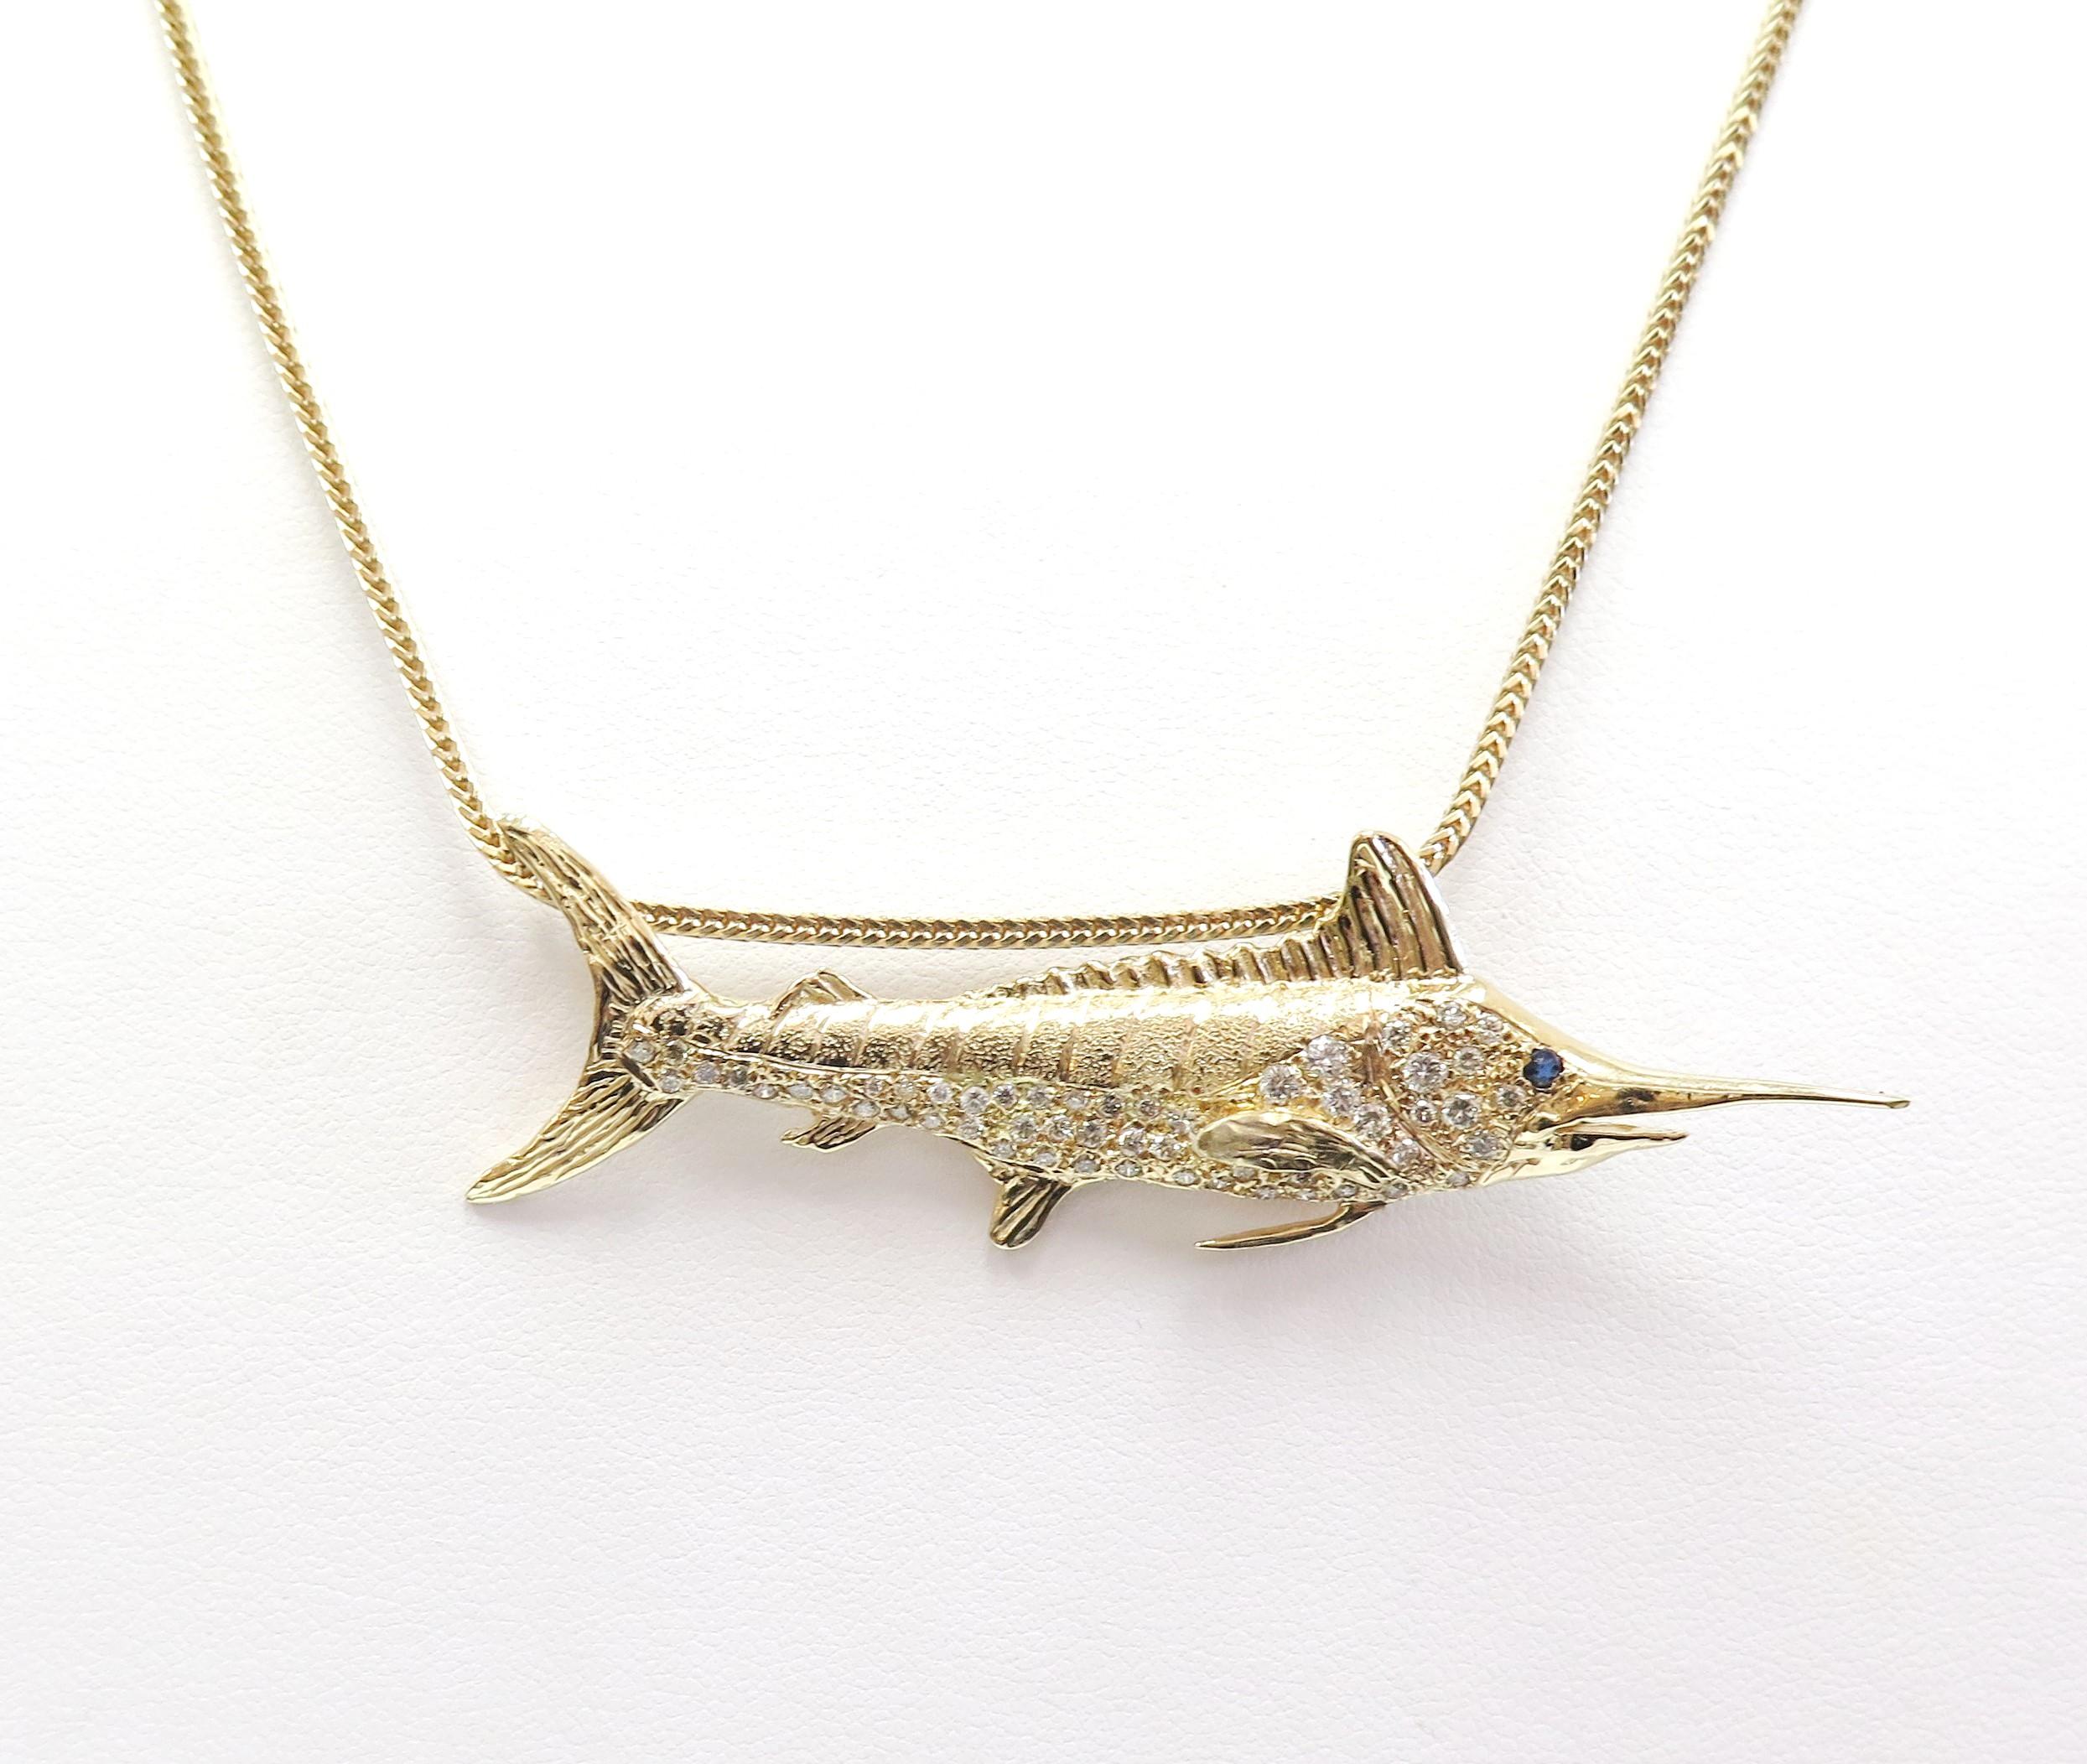 This stylish fish pendant will swim its way right into your heart. Crafted in cool 14 Karat yellow gold, this beautiful Marlin shines with a sapphire accent as its eye and 0.75 Carats of shimmering diamonds set gracefully along it's sleek body.

Can